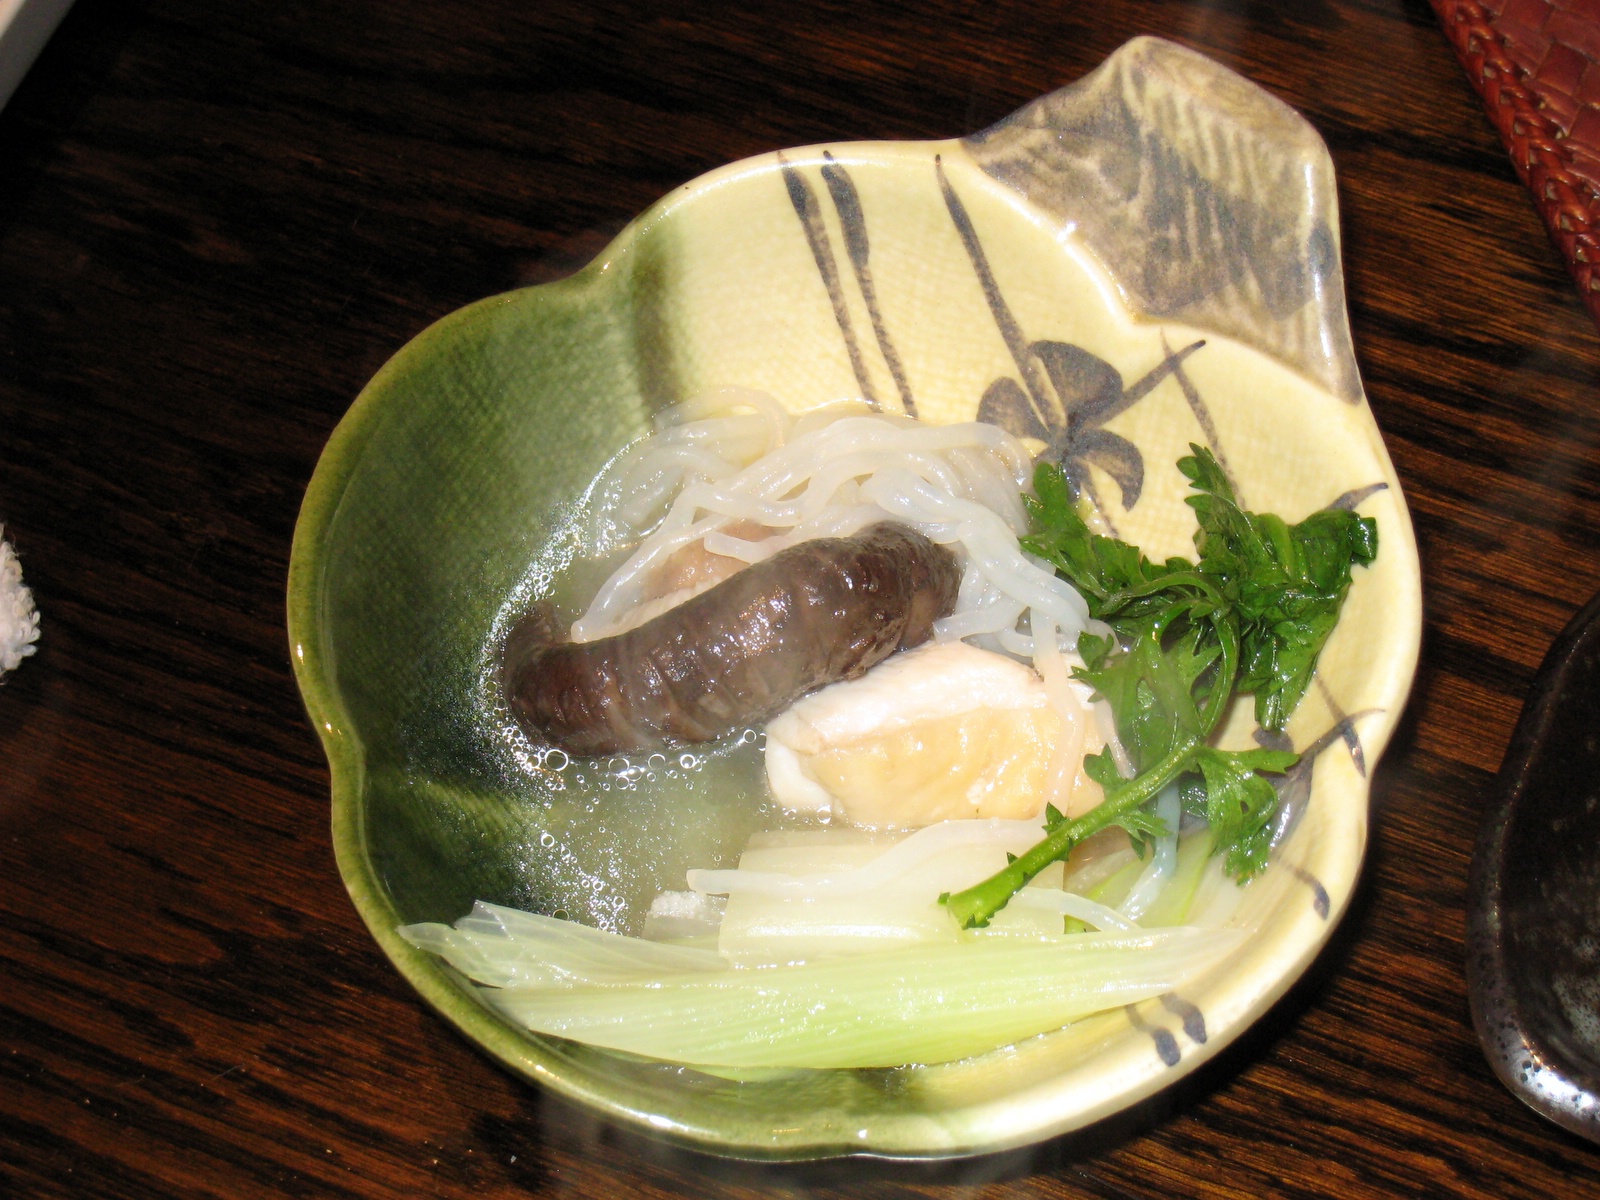 a plate with meat, veggies, and herbs in water